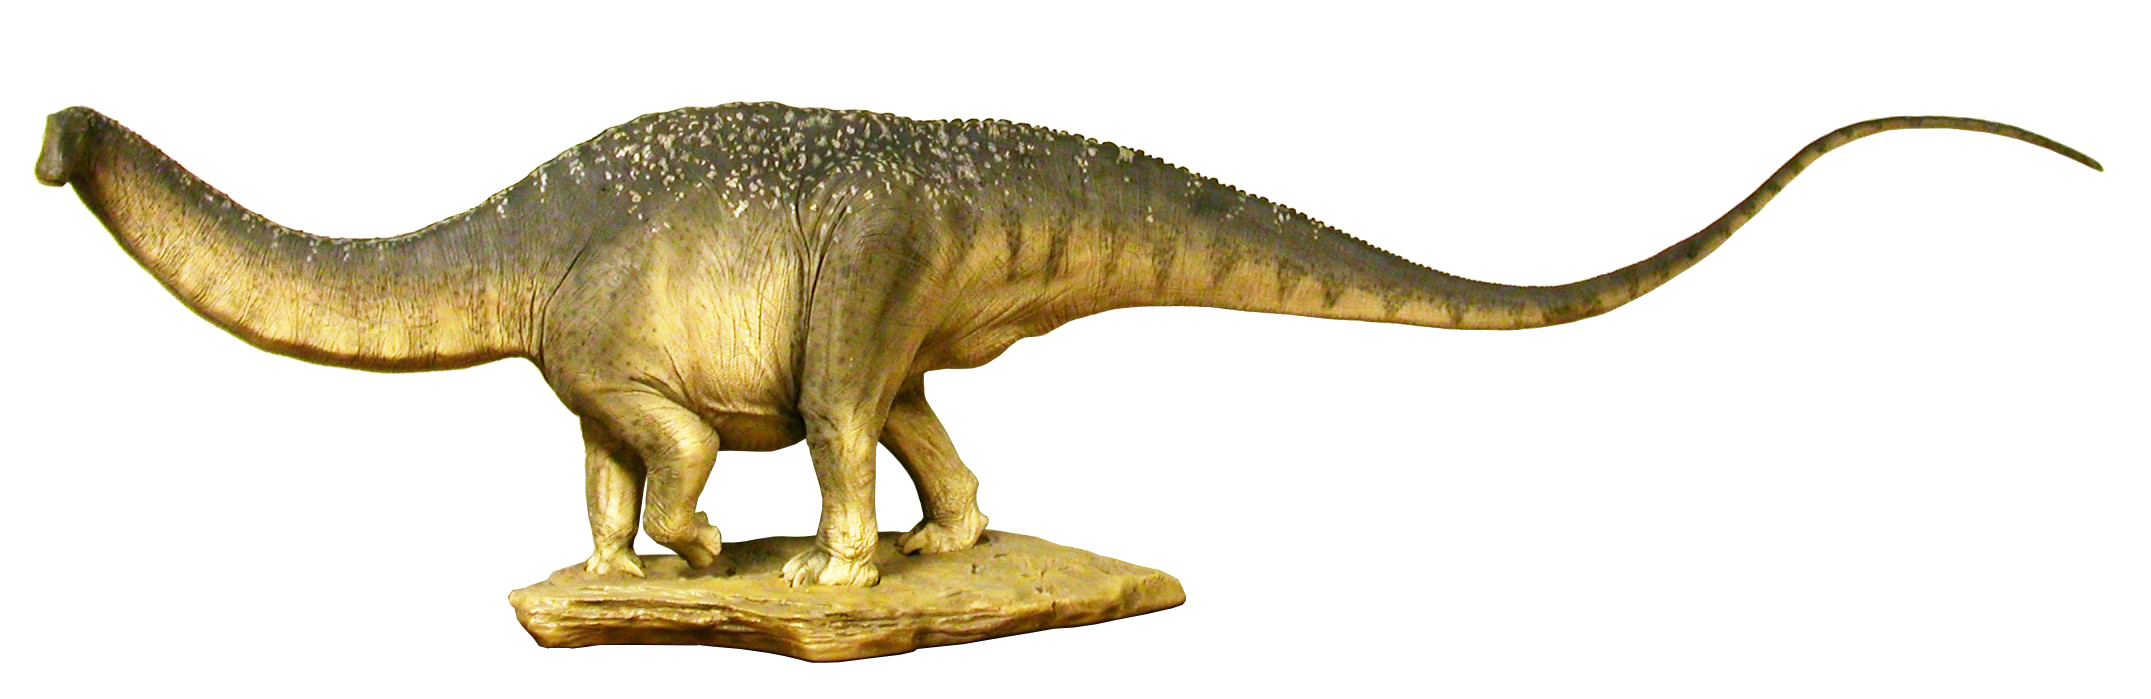 Download PNG image - Sauropod PNG Clipart 